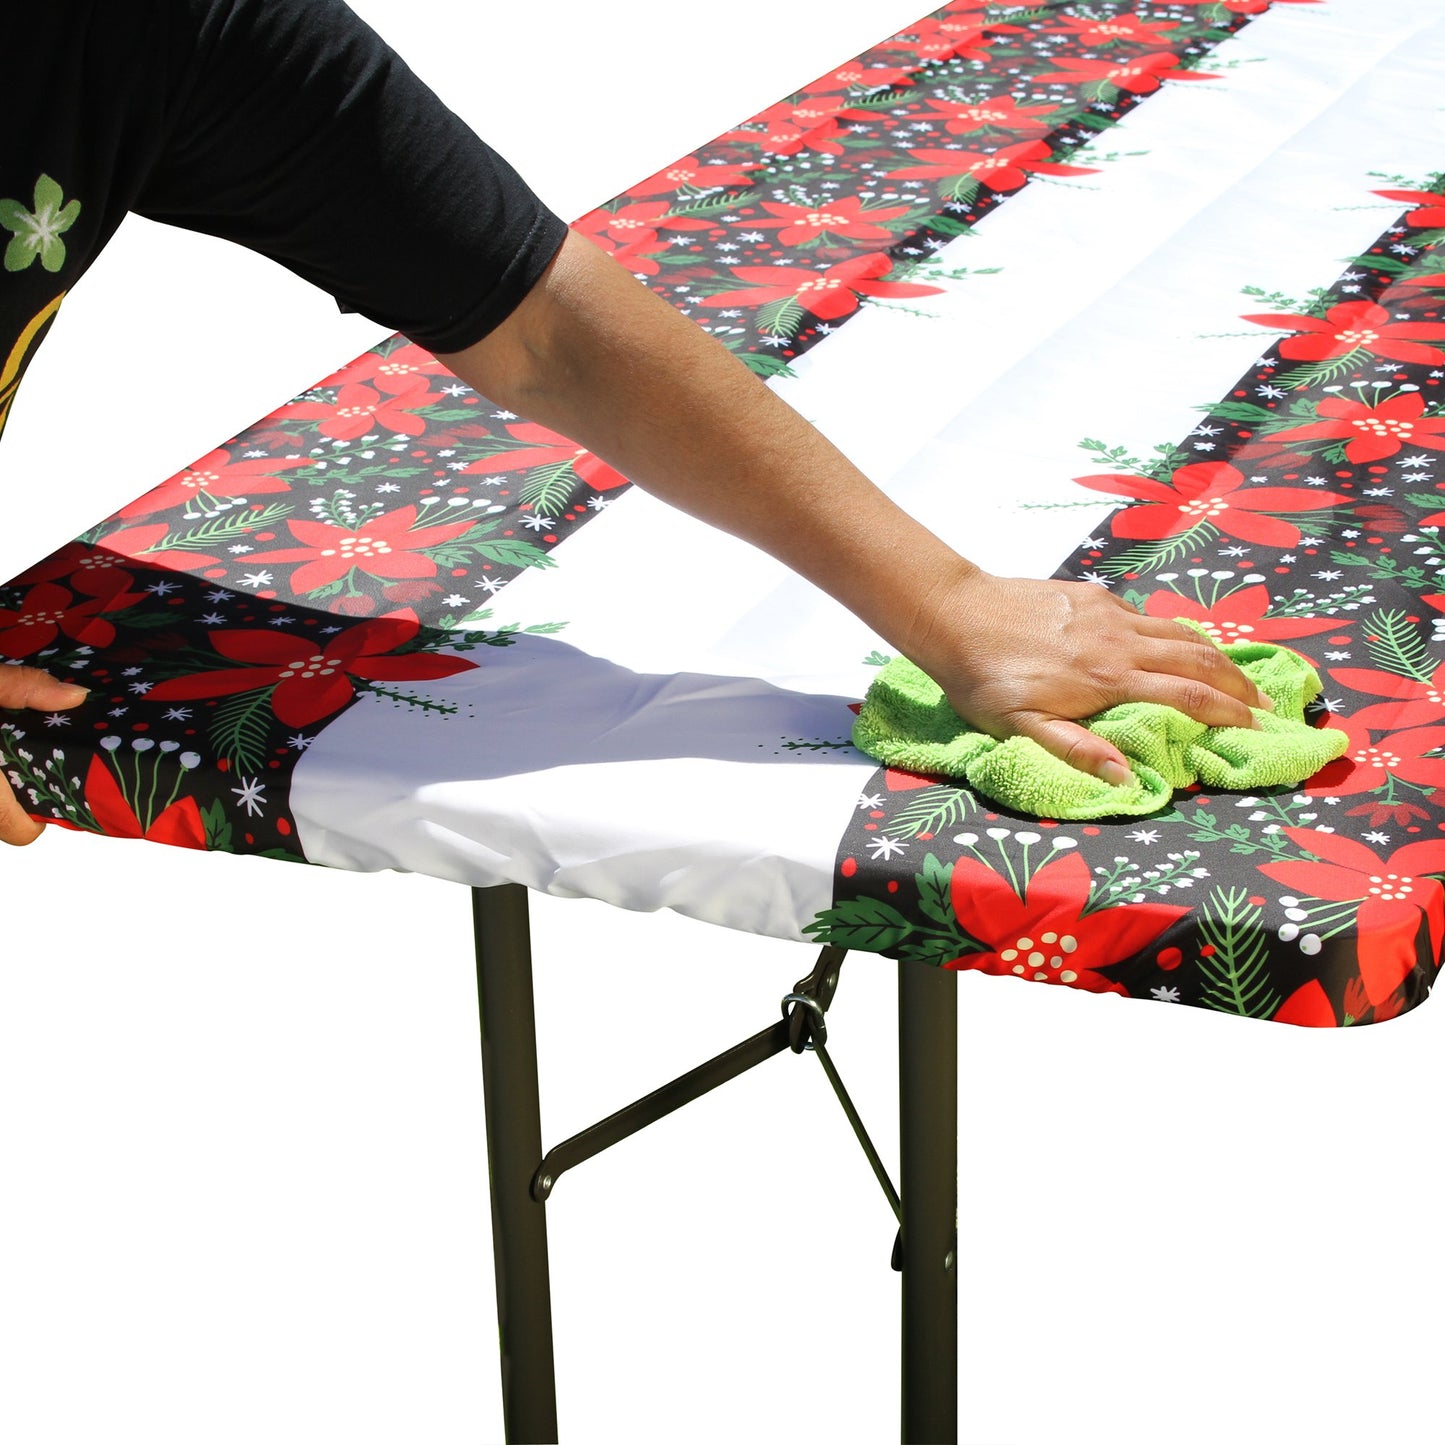 TableCloth PLUS 72" Winter Fitted Polyester Tablecloth for 6' Folding Tables can be wiped clean with a cloth